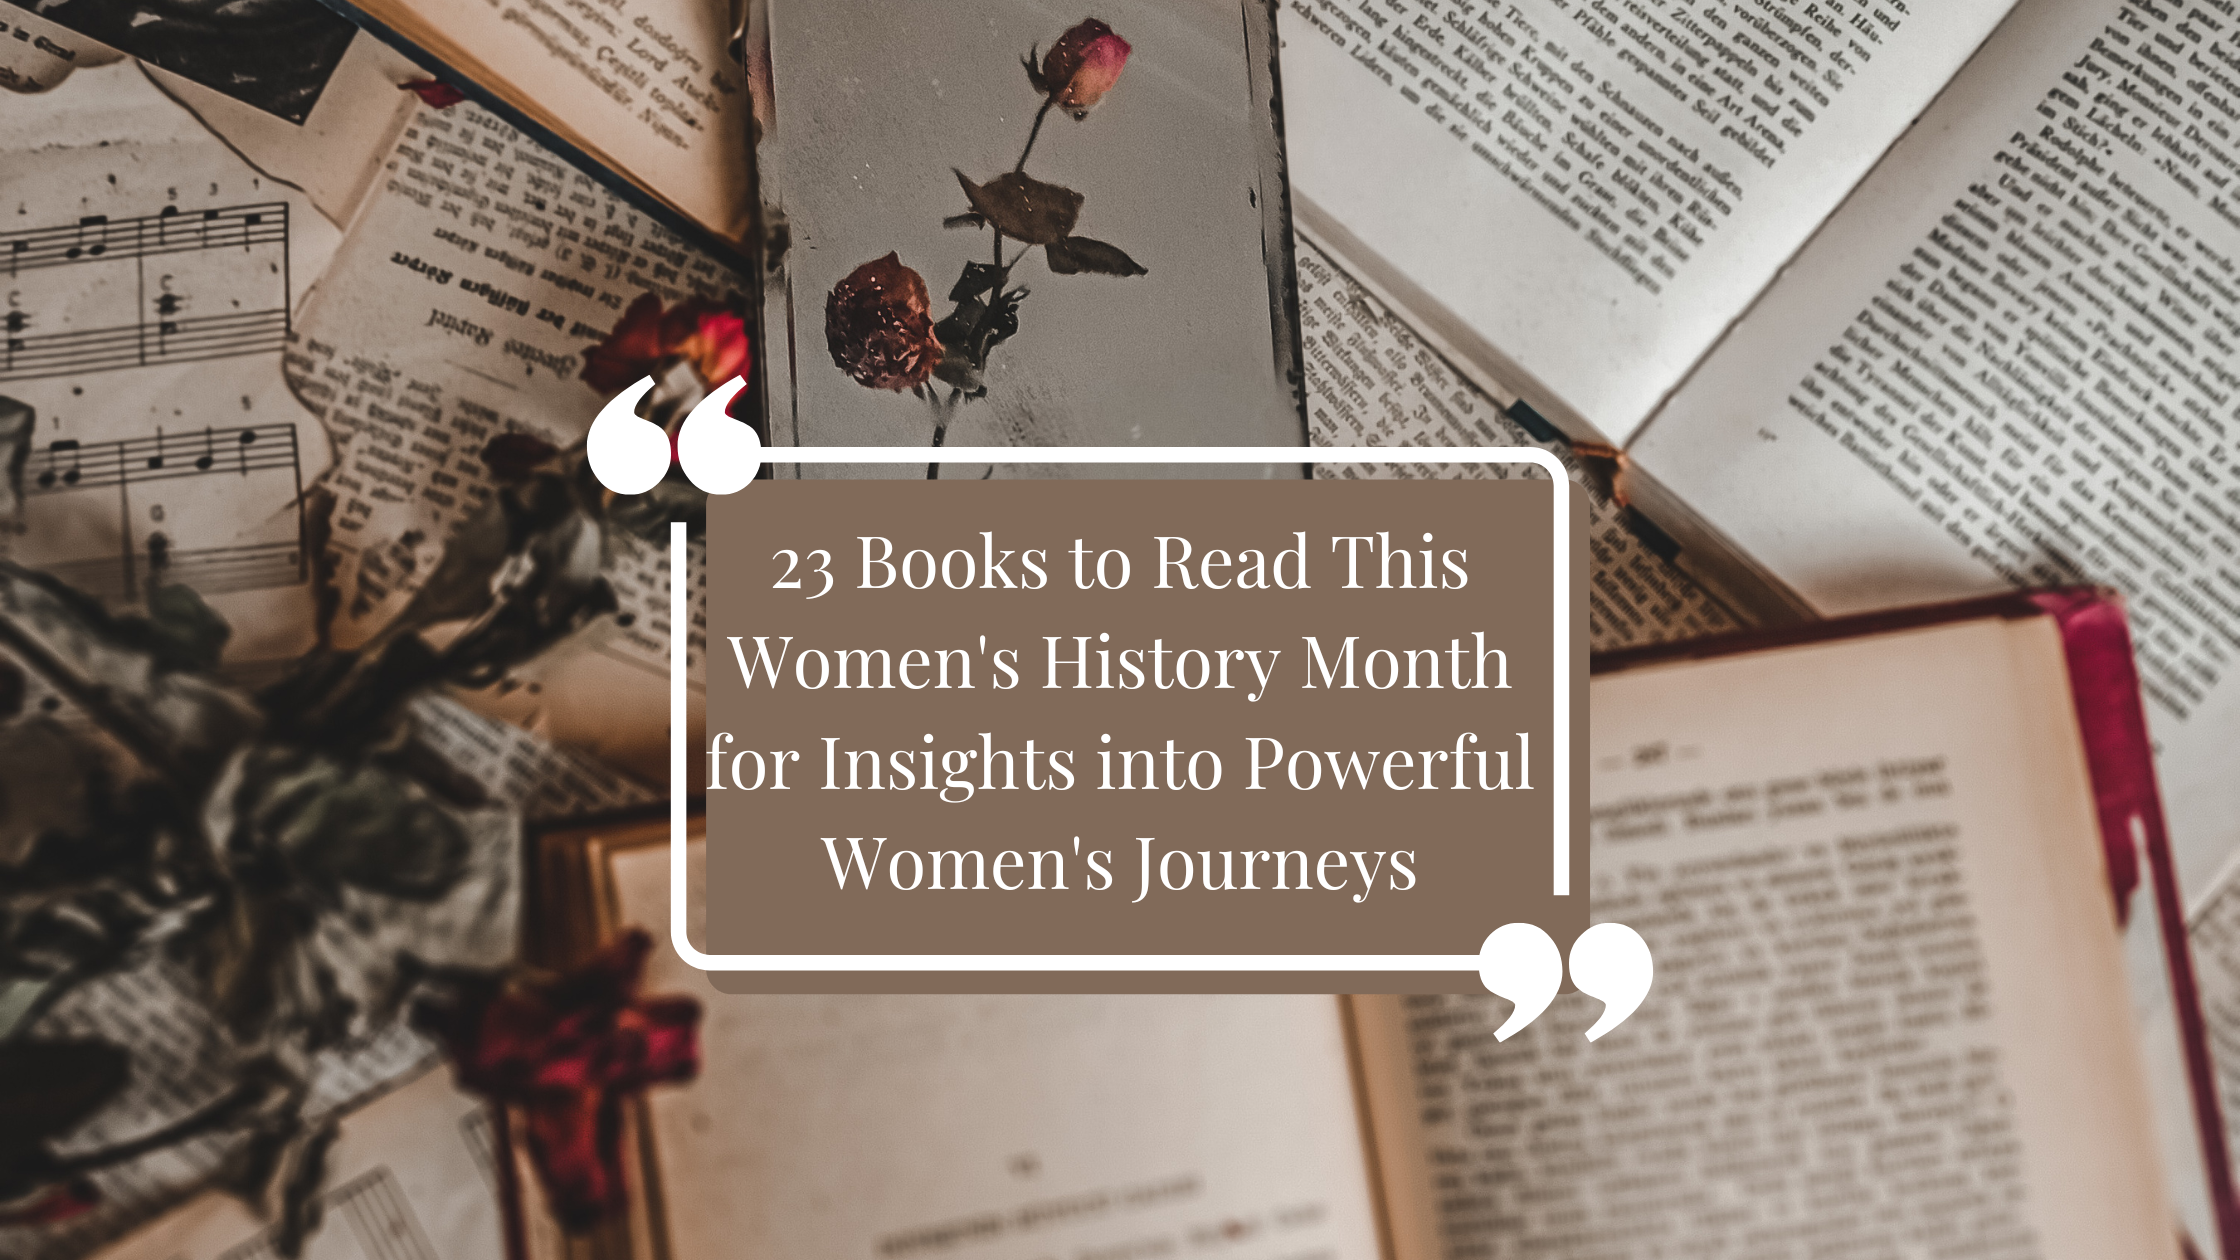 23 Books to Read This Women’s History Month for Insights into Powerful Women’s Journeys